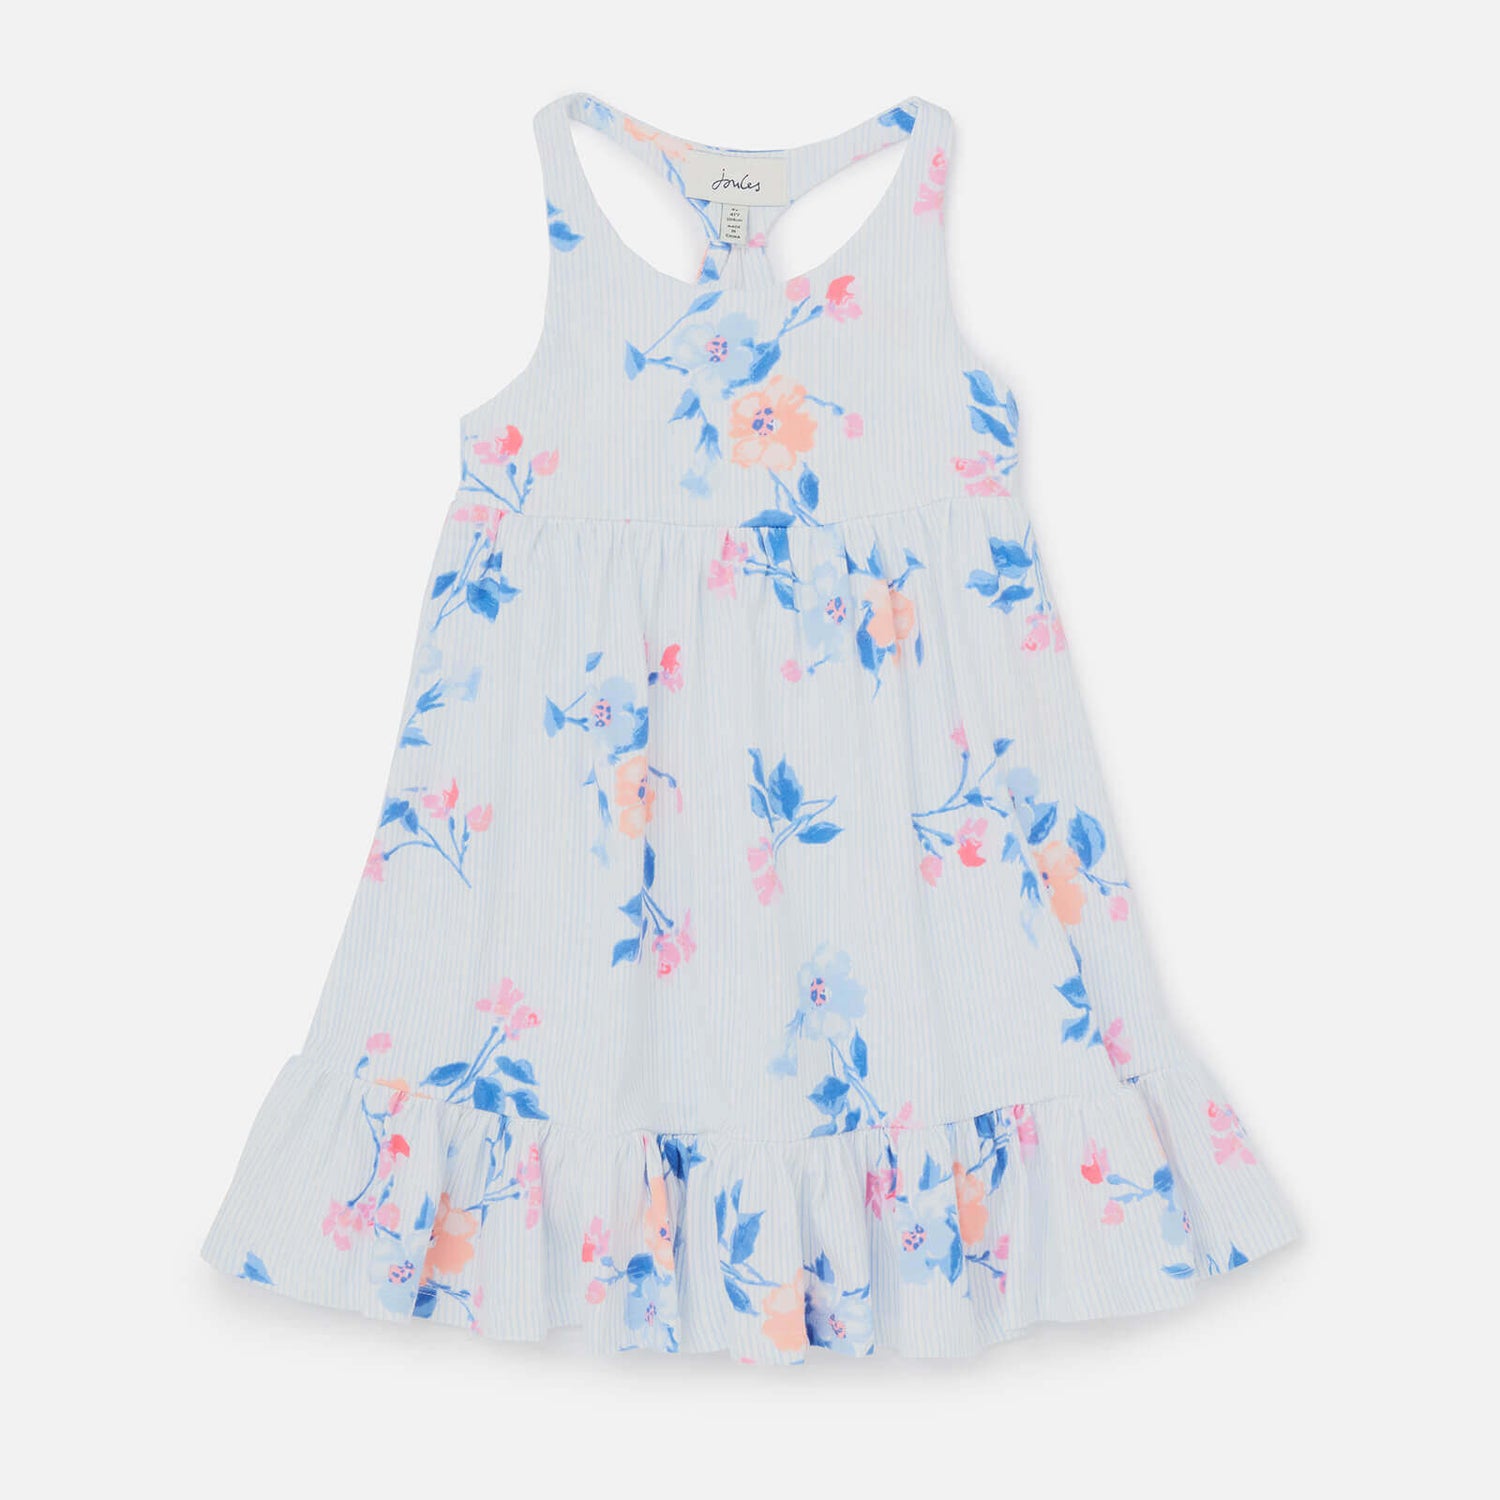 Joules Girls' Juno Floral Dress - White Floral Stripe